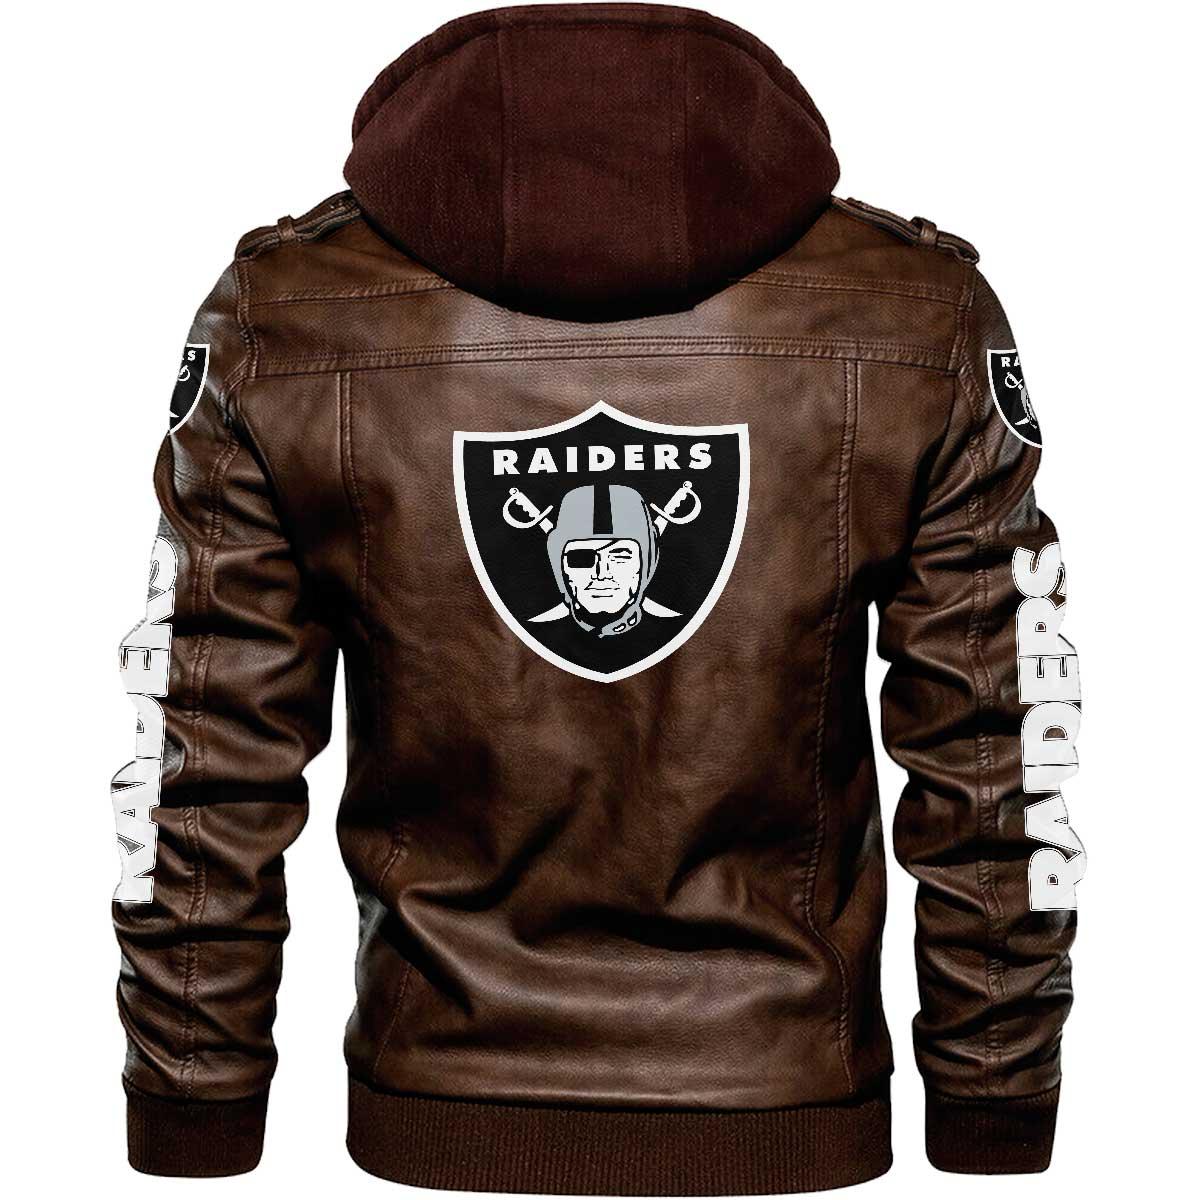 Stocktee Oakland Raiders Classic But Amazing Premium Quality Leather